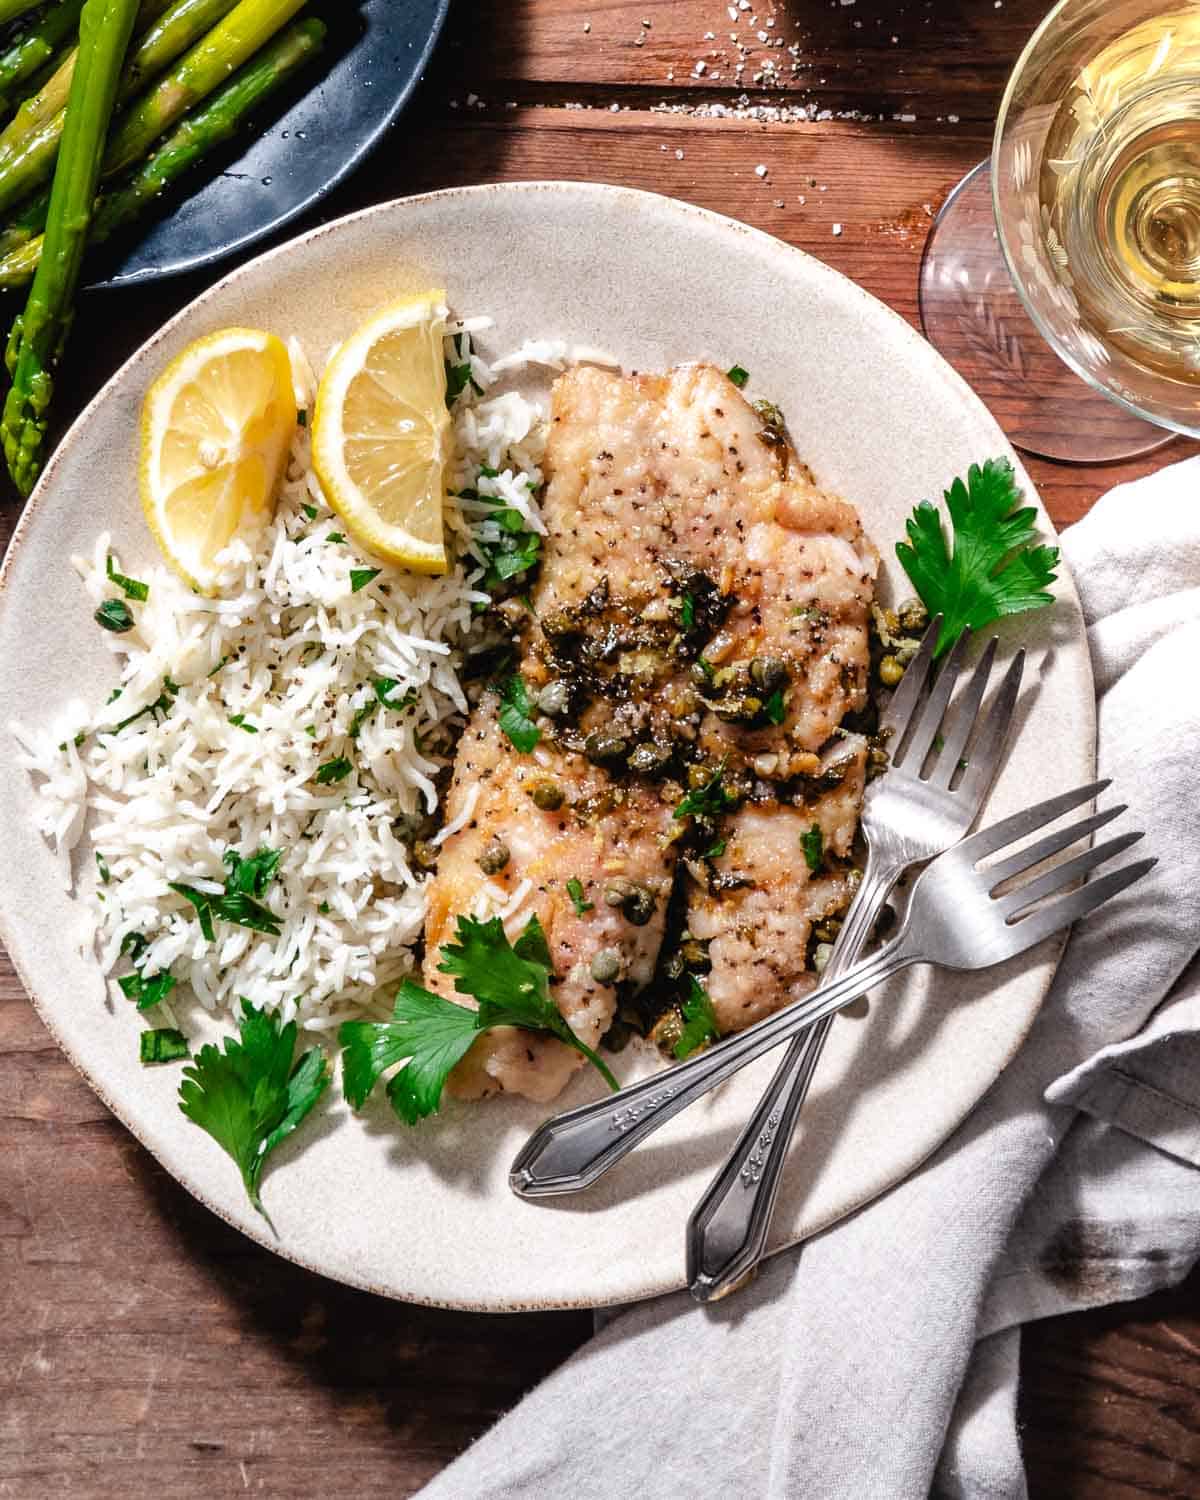 Fish piccata with rice. Lemon wedges, and asparagus.